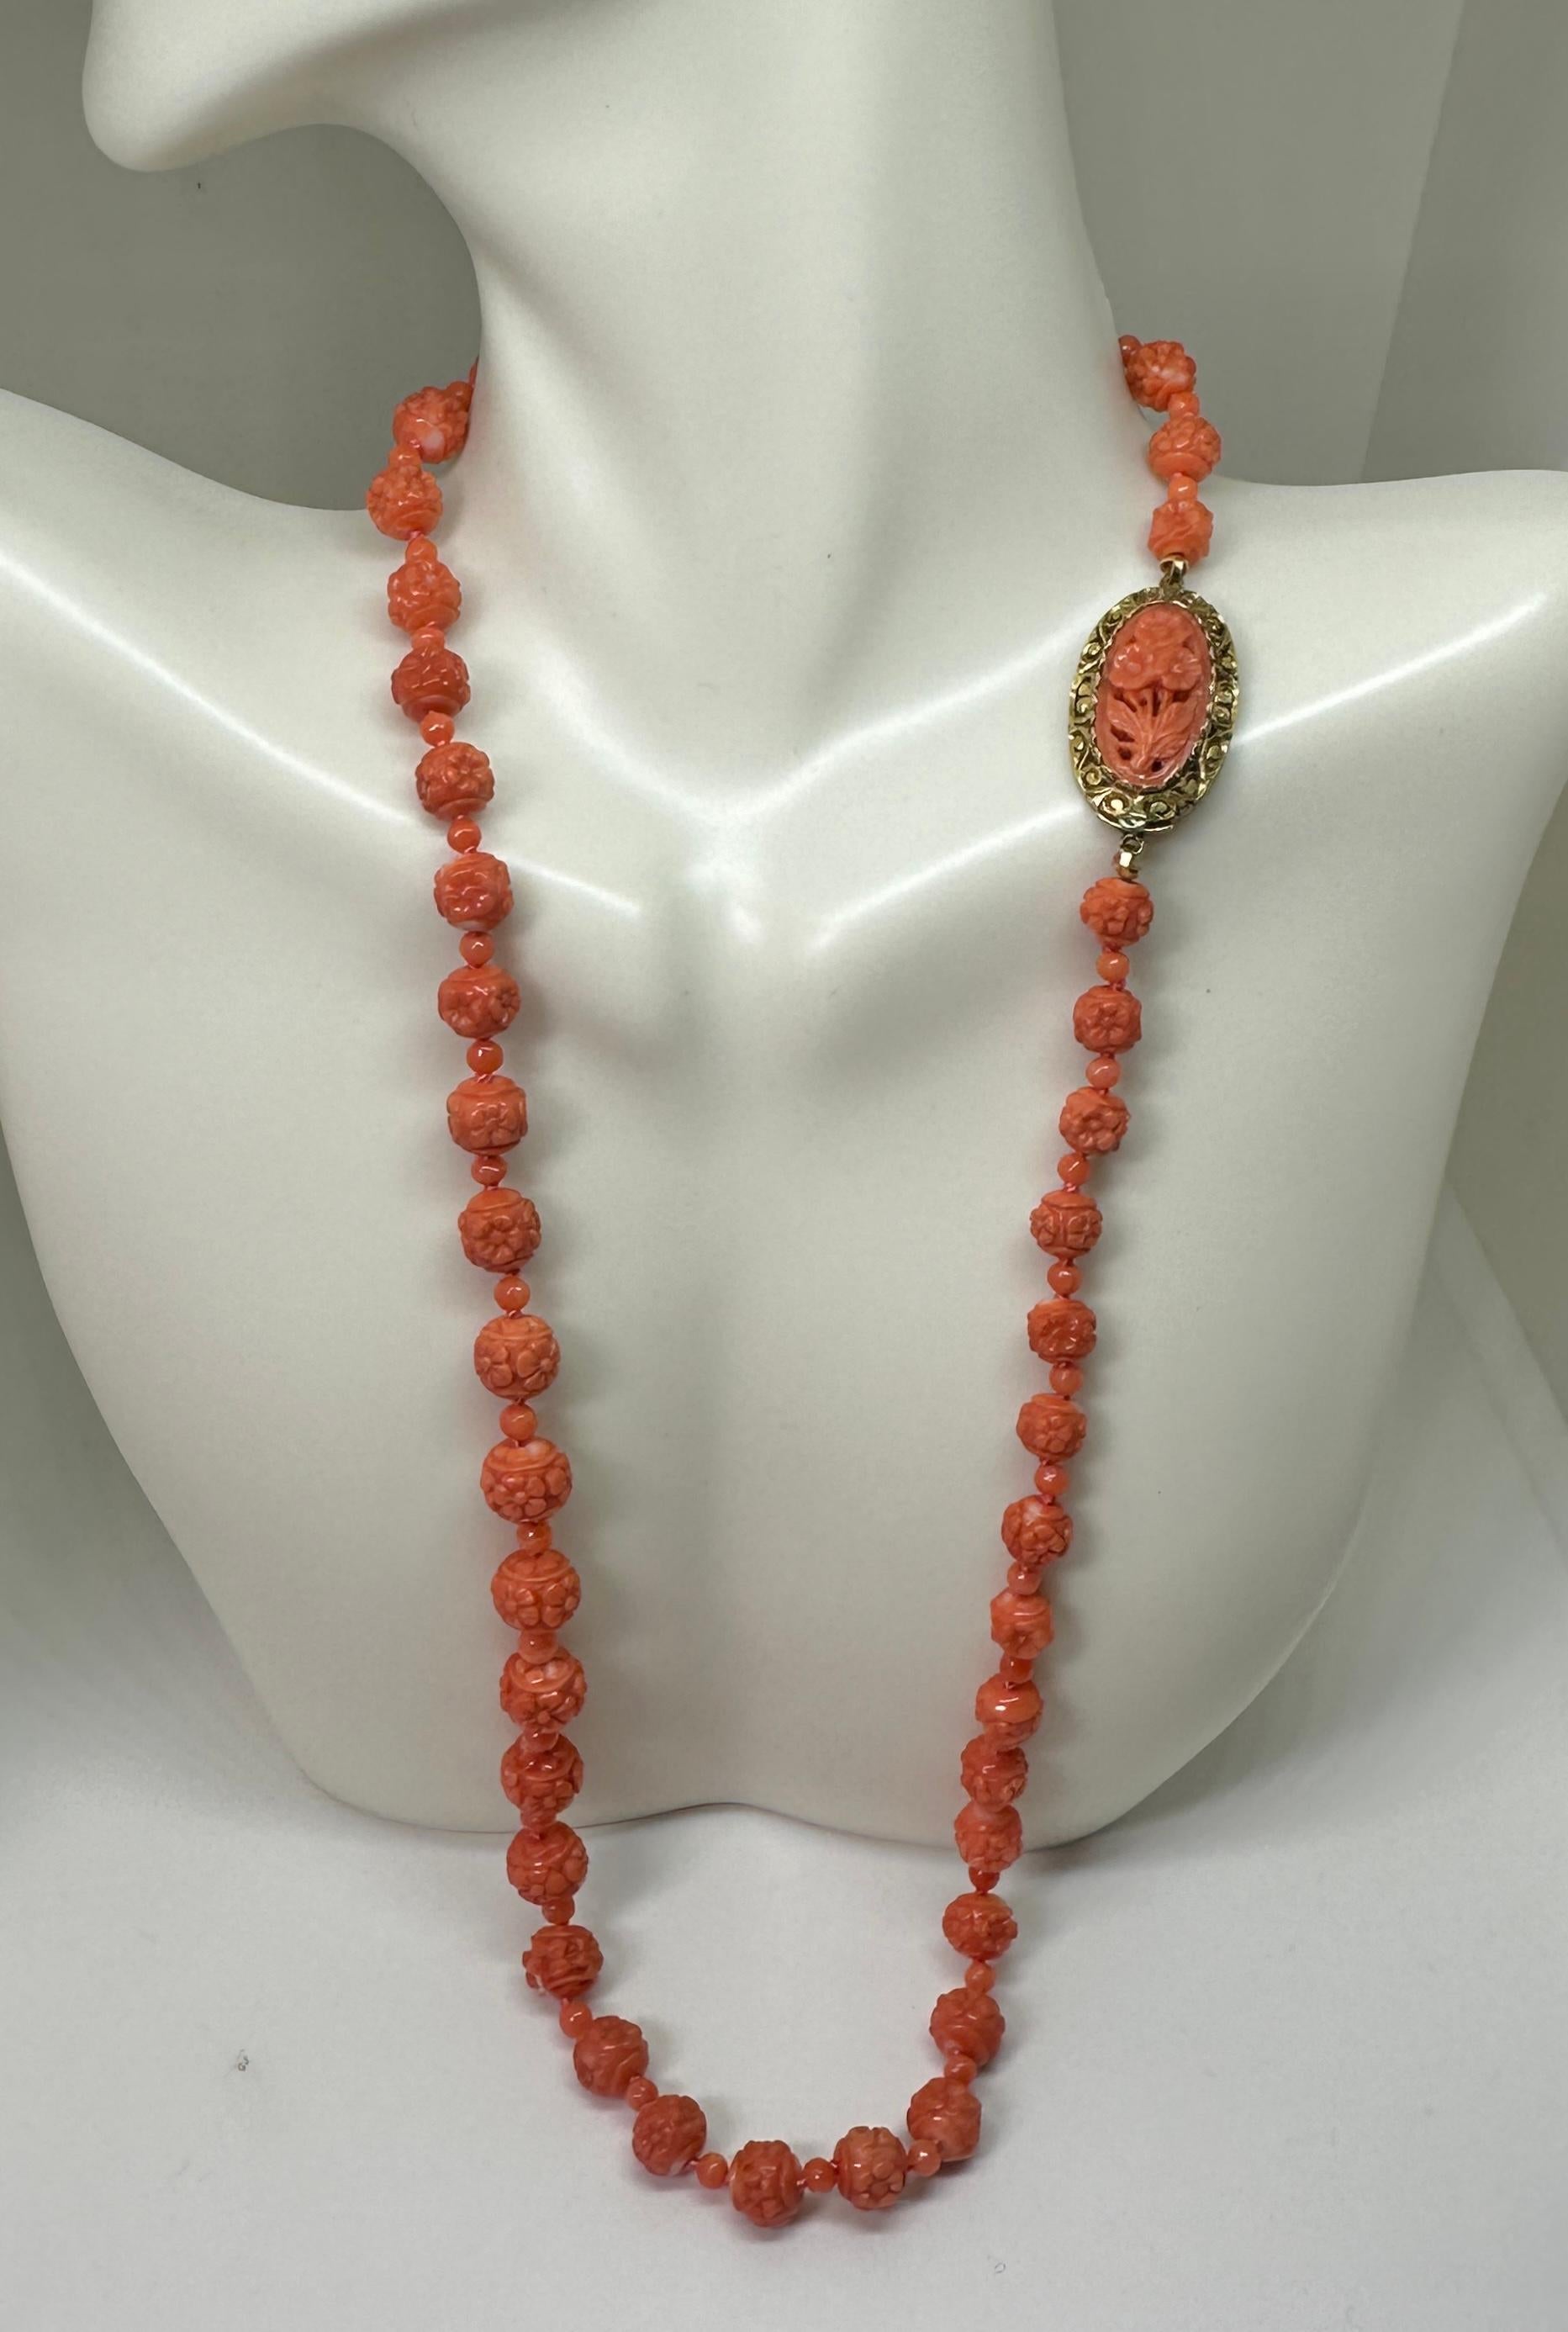 Victorian Coral Flower Necklace 18 Karat Gold Hand Carved Coral Beads and Clasp For Sale 3